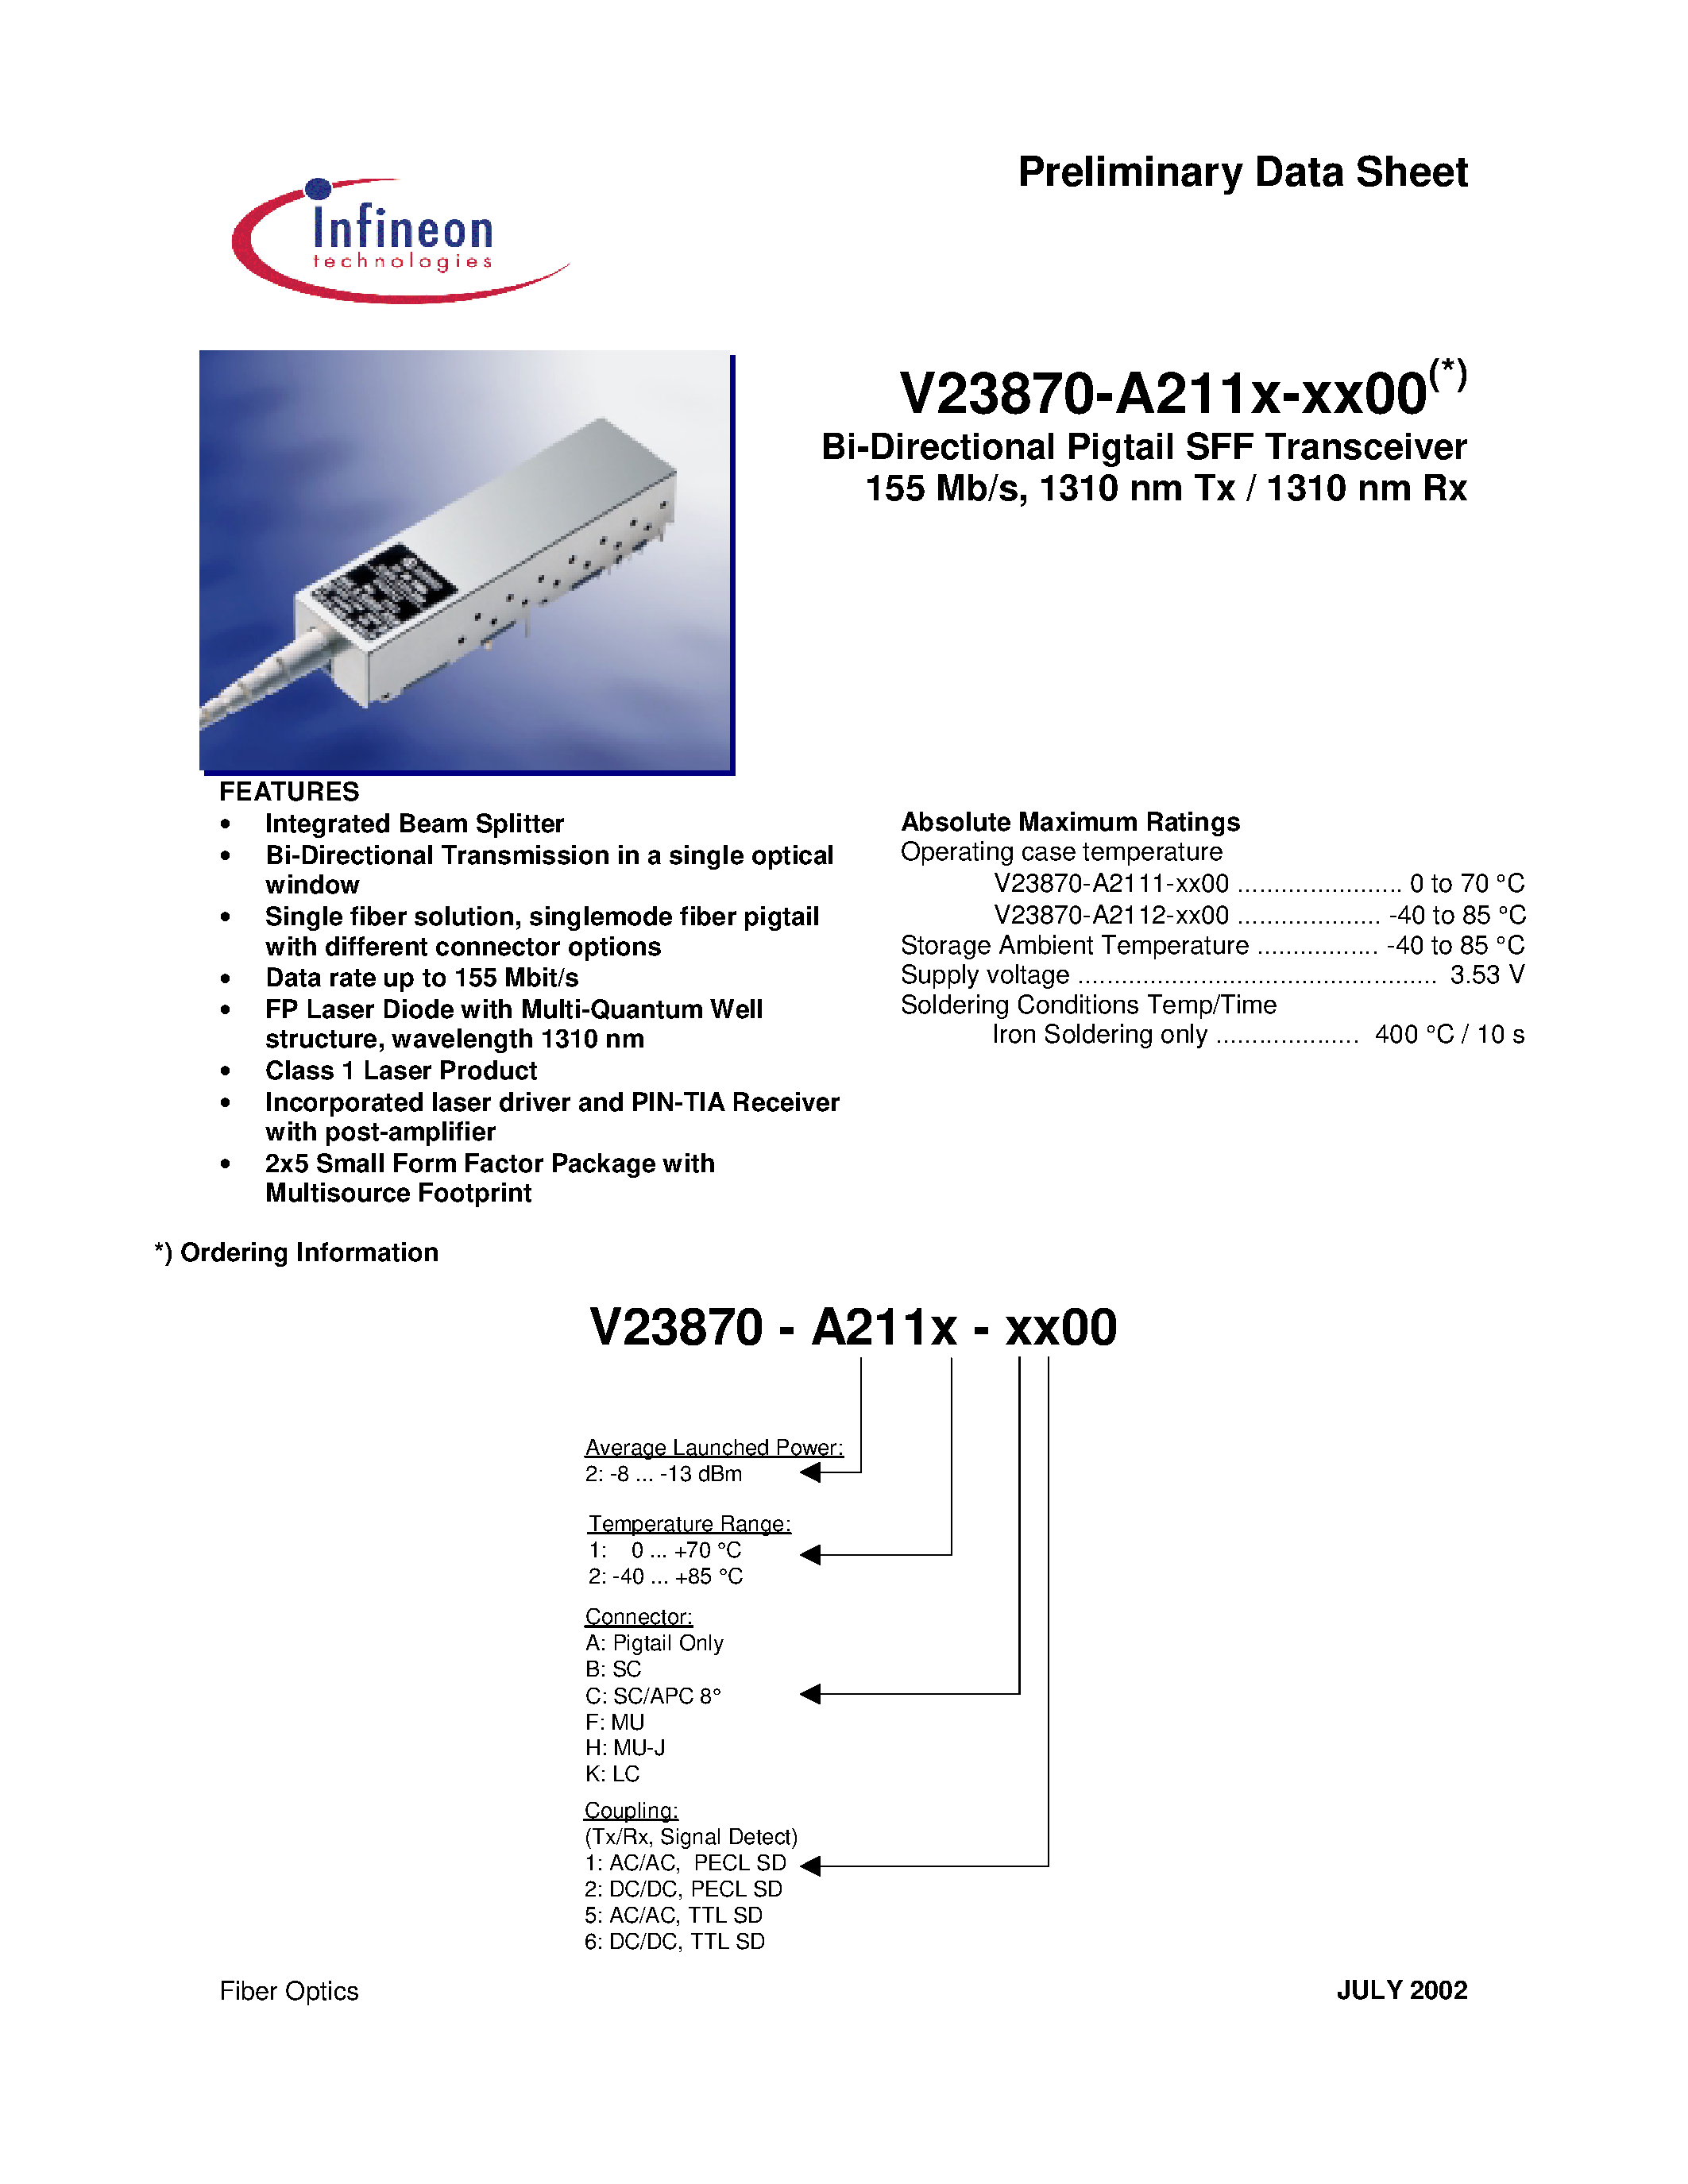 Datasheet V23870-A2112-A100 - Bi-Directional Pigtail SFF Transceiver 155 Mb/s/ 1310 nm Tx / 1310 nm Rx page 1